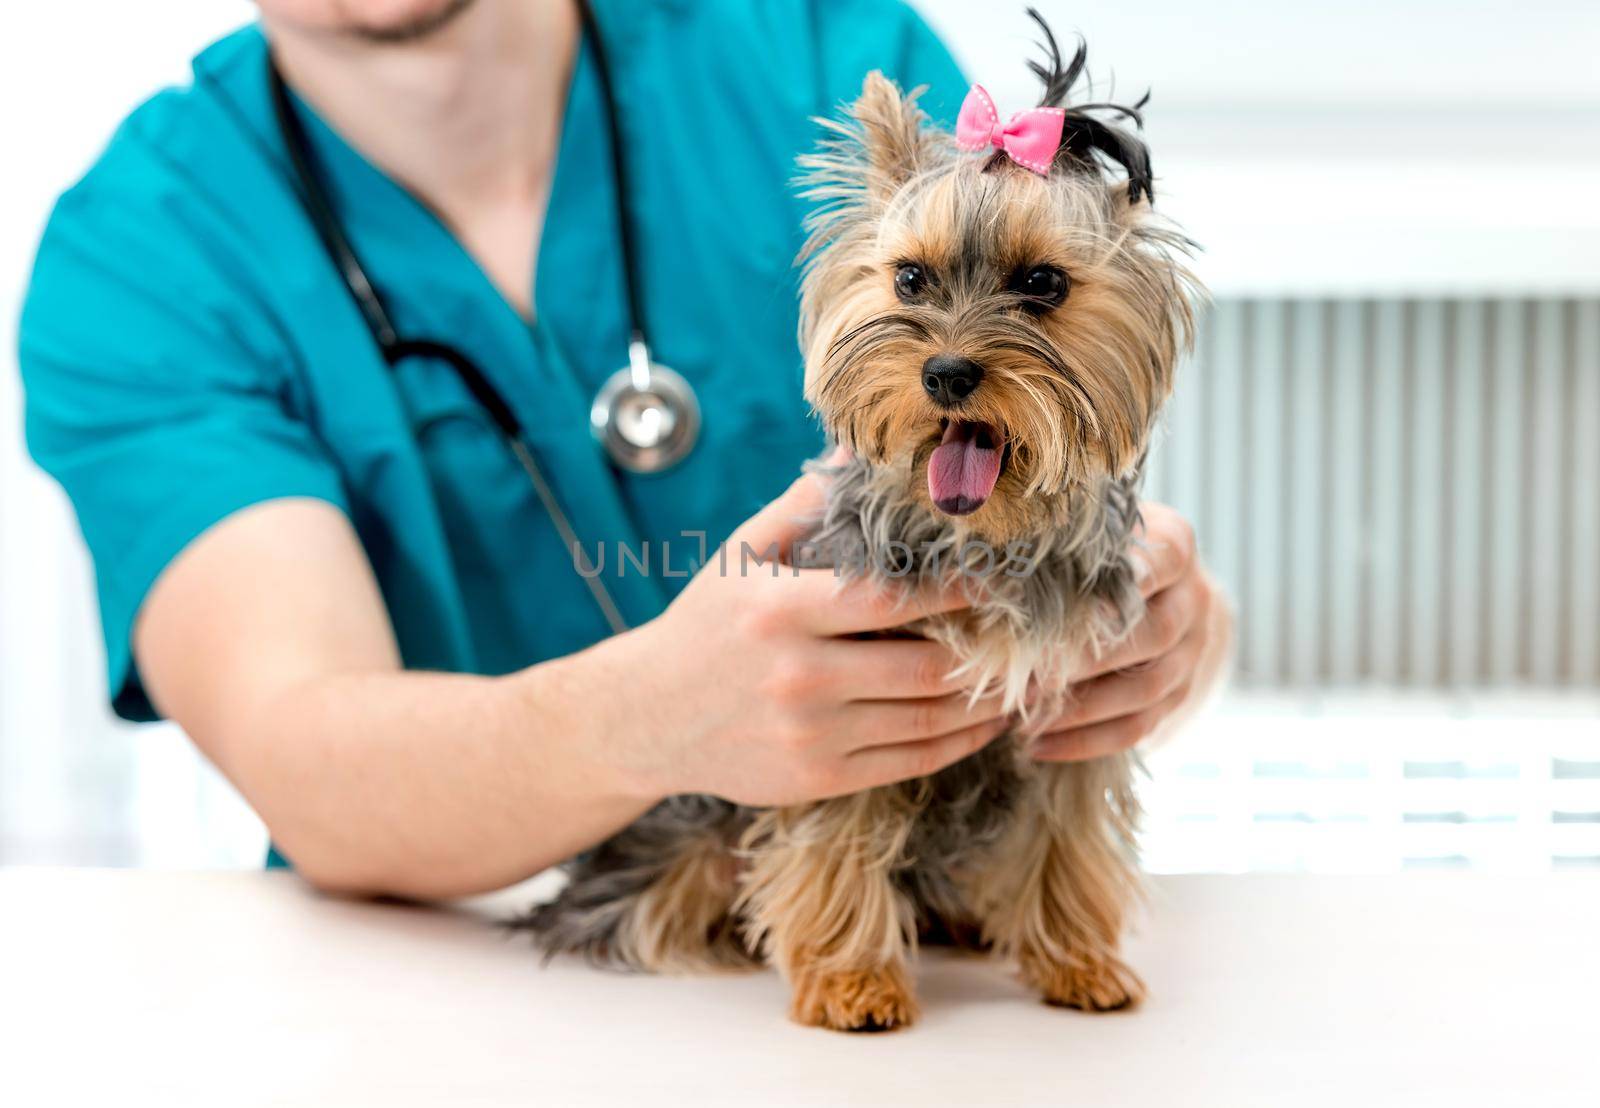 Veterinarian hands holding Yorkshire Terrier dog on examination table by tan4ikk1